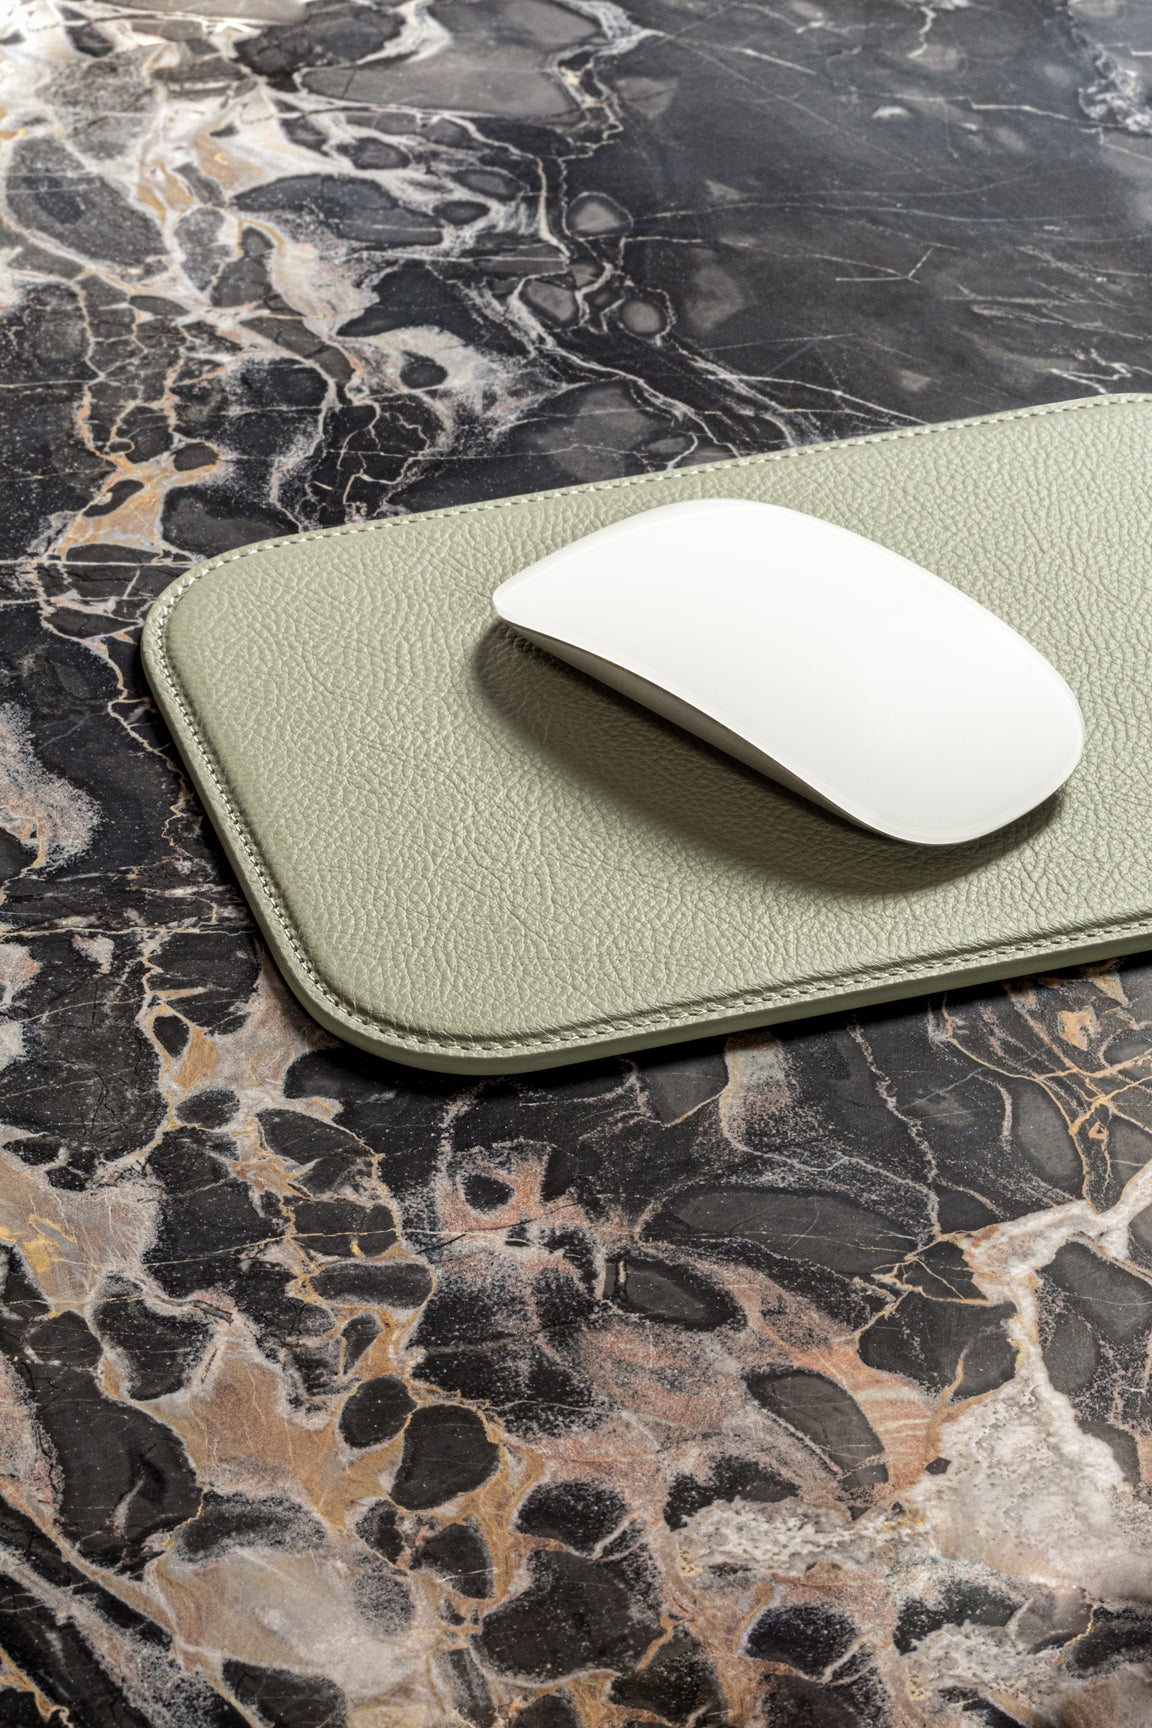 Giobagnara x Poltrona Frau Leather Mouse Pad | Leather-Covered Rigid Mouse Pad | Made in Pelle Frau® Leather | Explore Premium Office Accessories at 2Jour Concierge, #1 luxury high-end gift & lifestyle shop